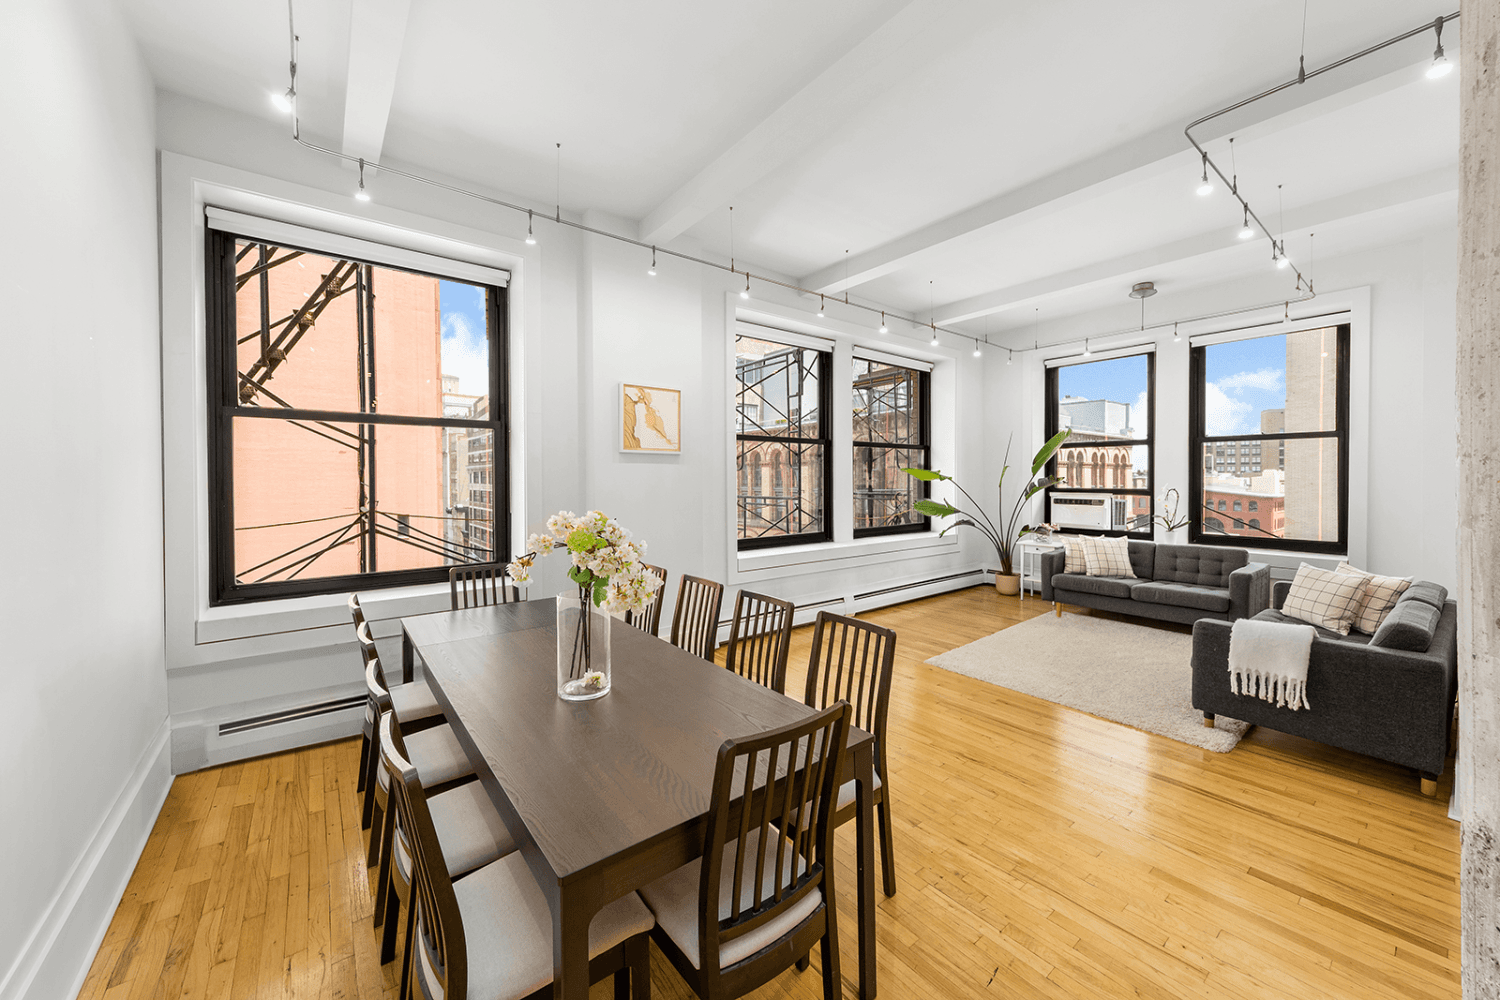 Just Listed ! Introducing a Spacious True 2 Bedroom 2 bath Corner loft with Newly Renovated Kitchen amp ; 8 Massive Windows and 11 foot ceilings at the Full Service ...